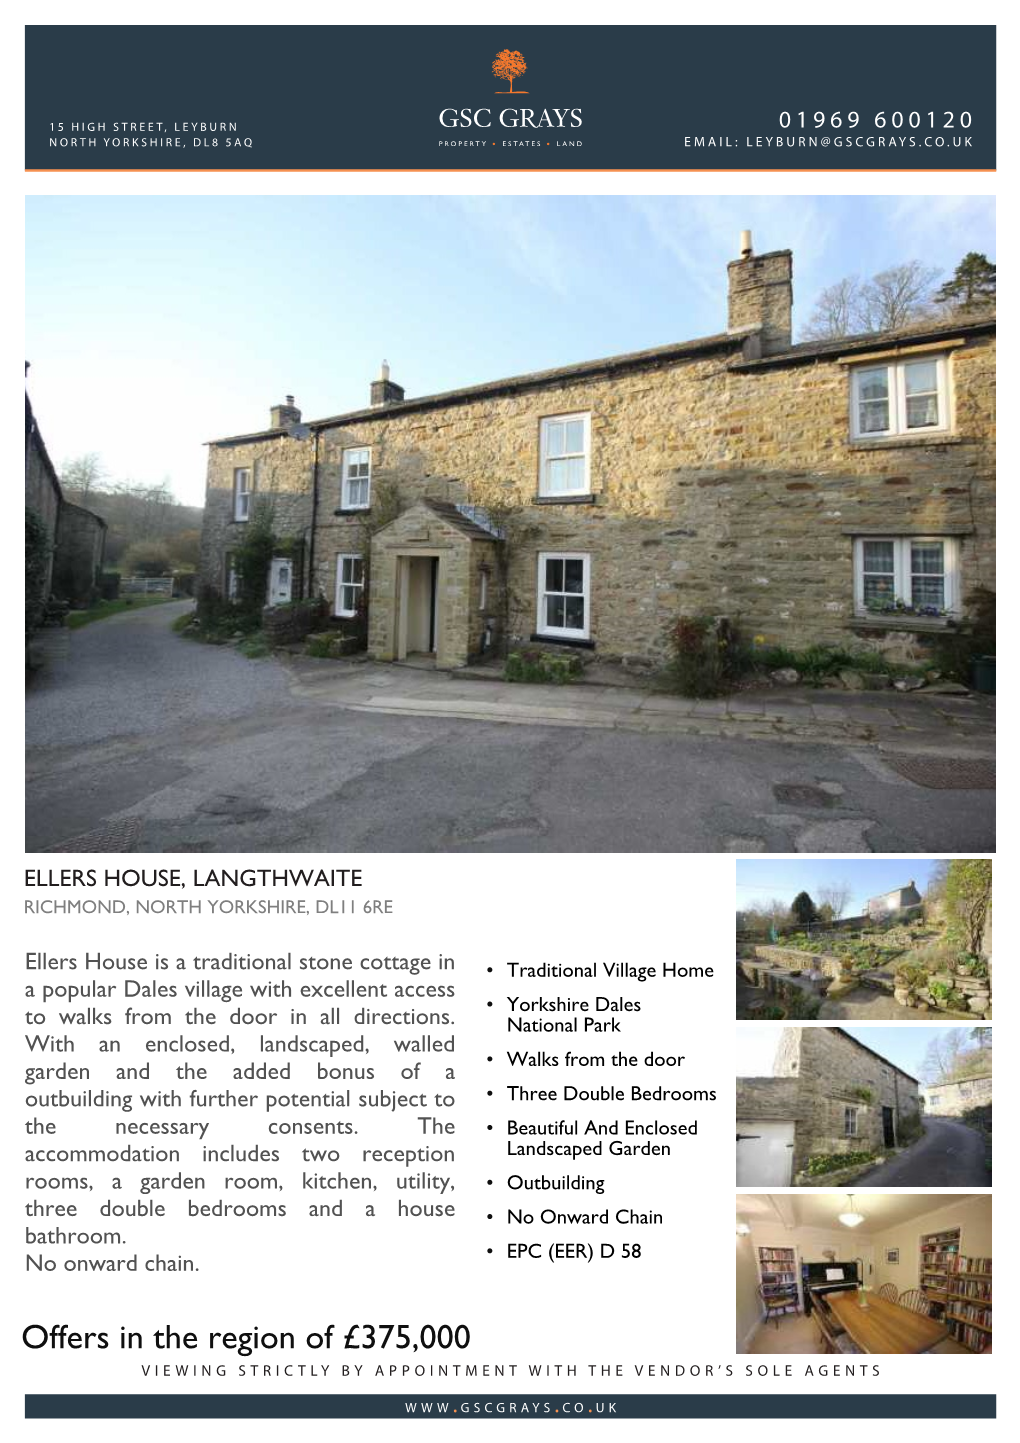 Offers in the Region of £375,000 Viewing Strictly by Appointment with the Vendor’S Sole Agents